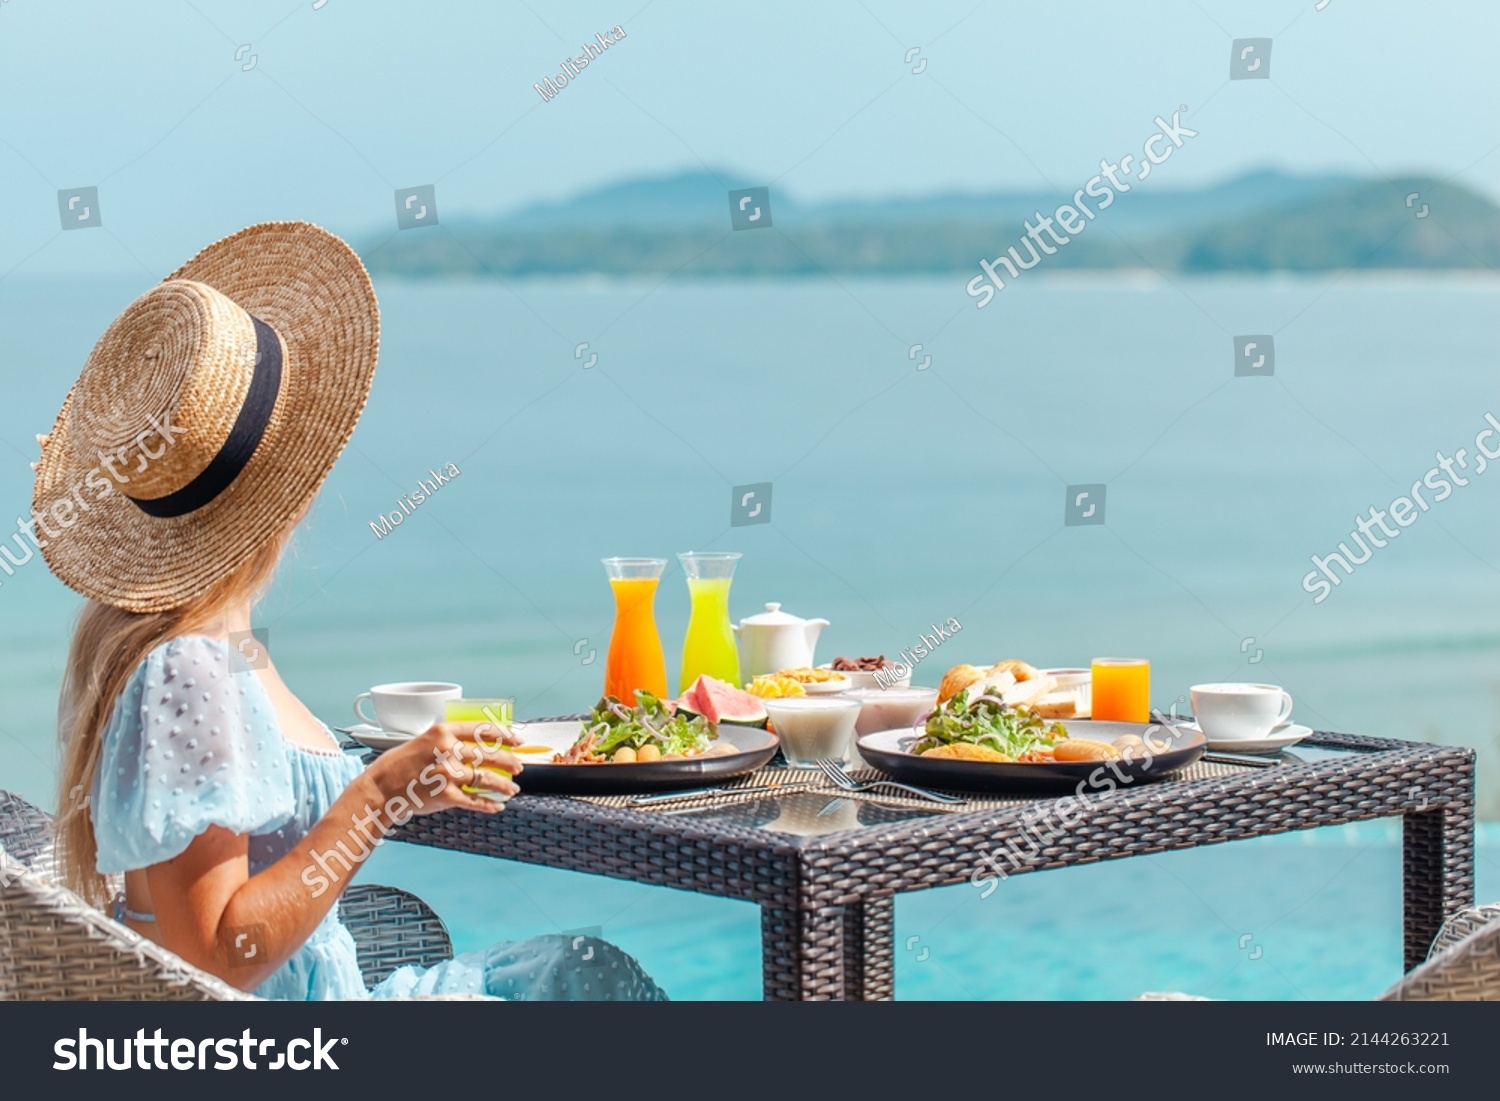 Dinner with sea view in luxury hotel. Woman in straw hat near swimming pool, eating food and enjoy ocean view. Dinner table on tropical vacation. Back view. Concept of travel, holidays, weekend. #2144263221